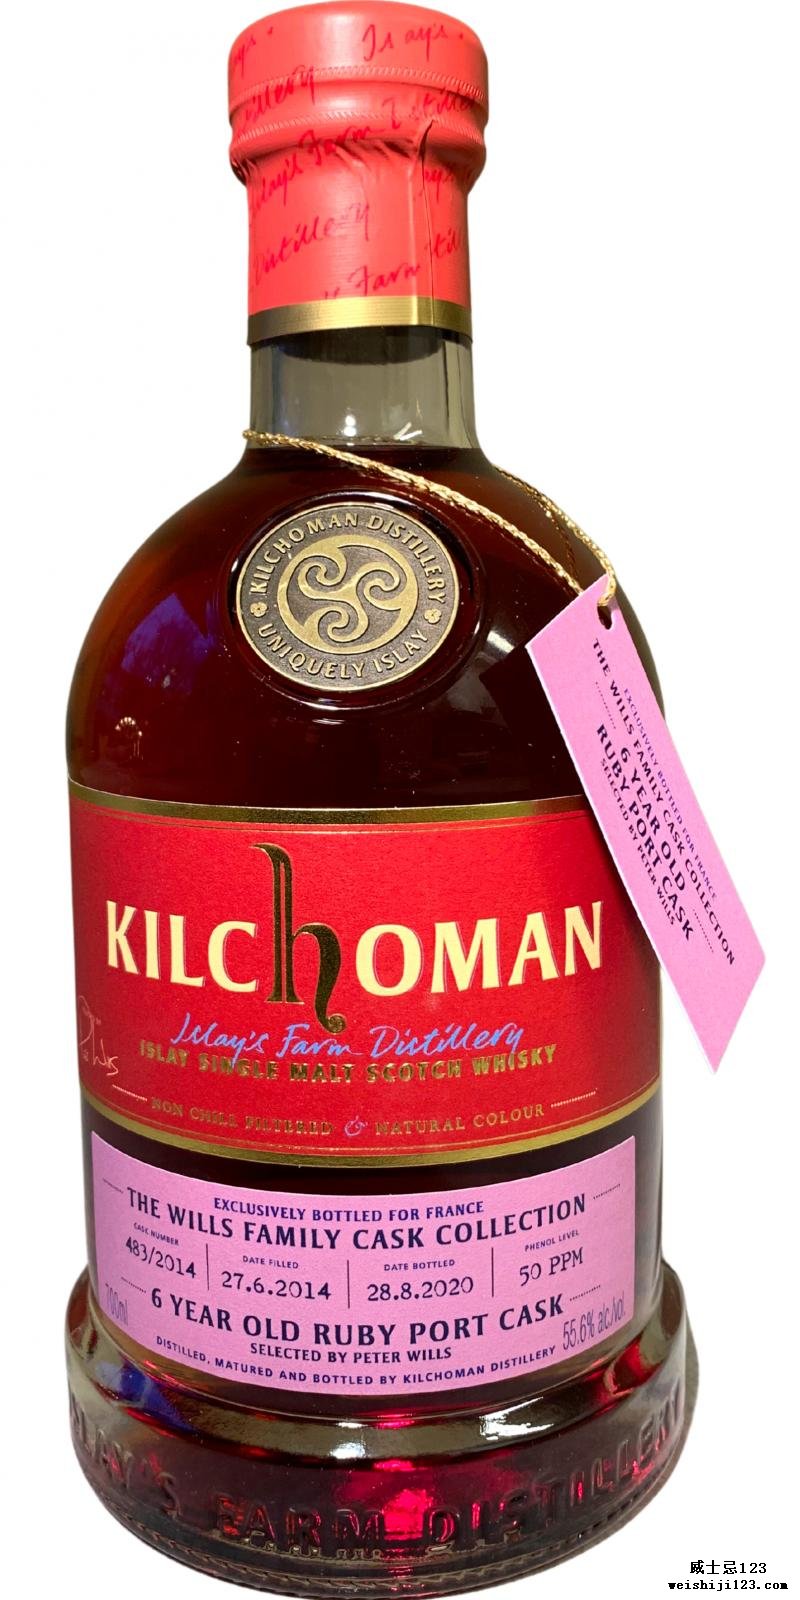 Kilchoman The Wills Family Cask Collection - Peter Wills